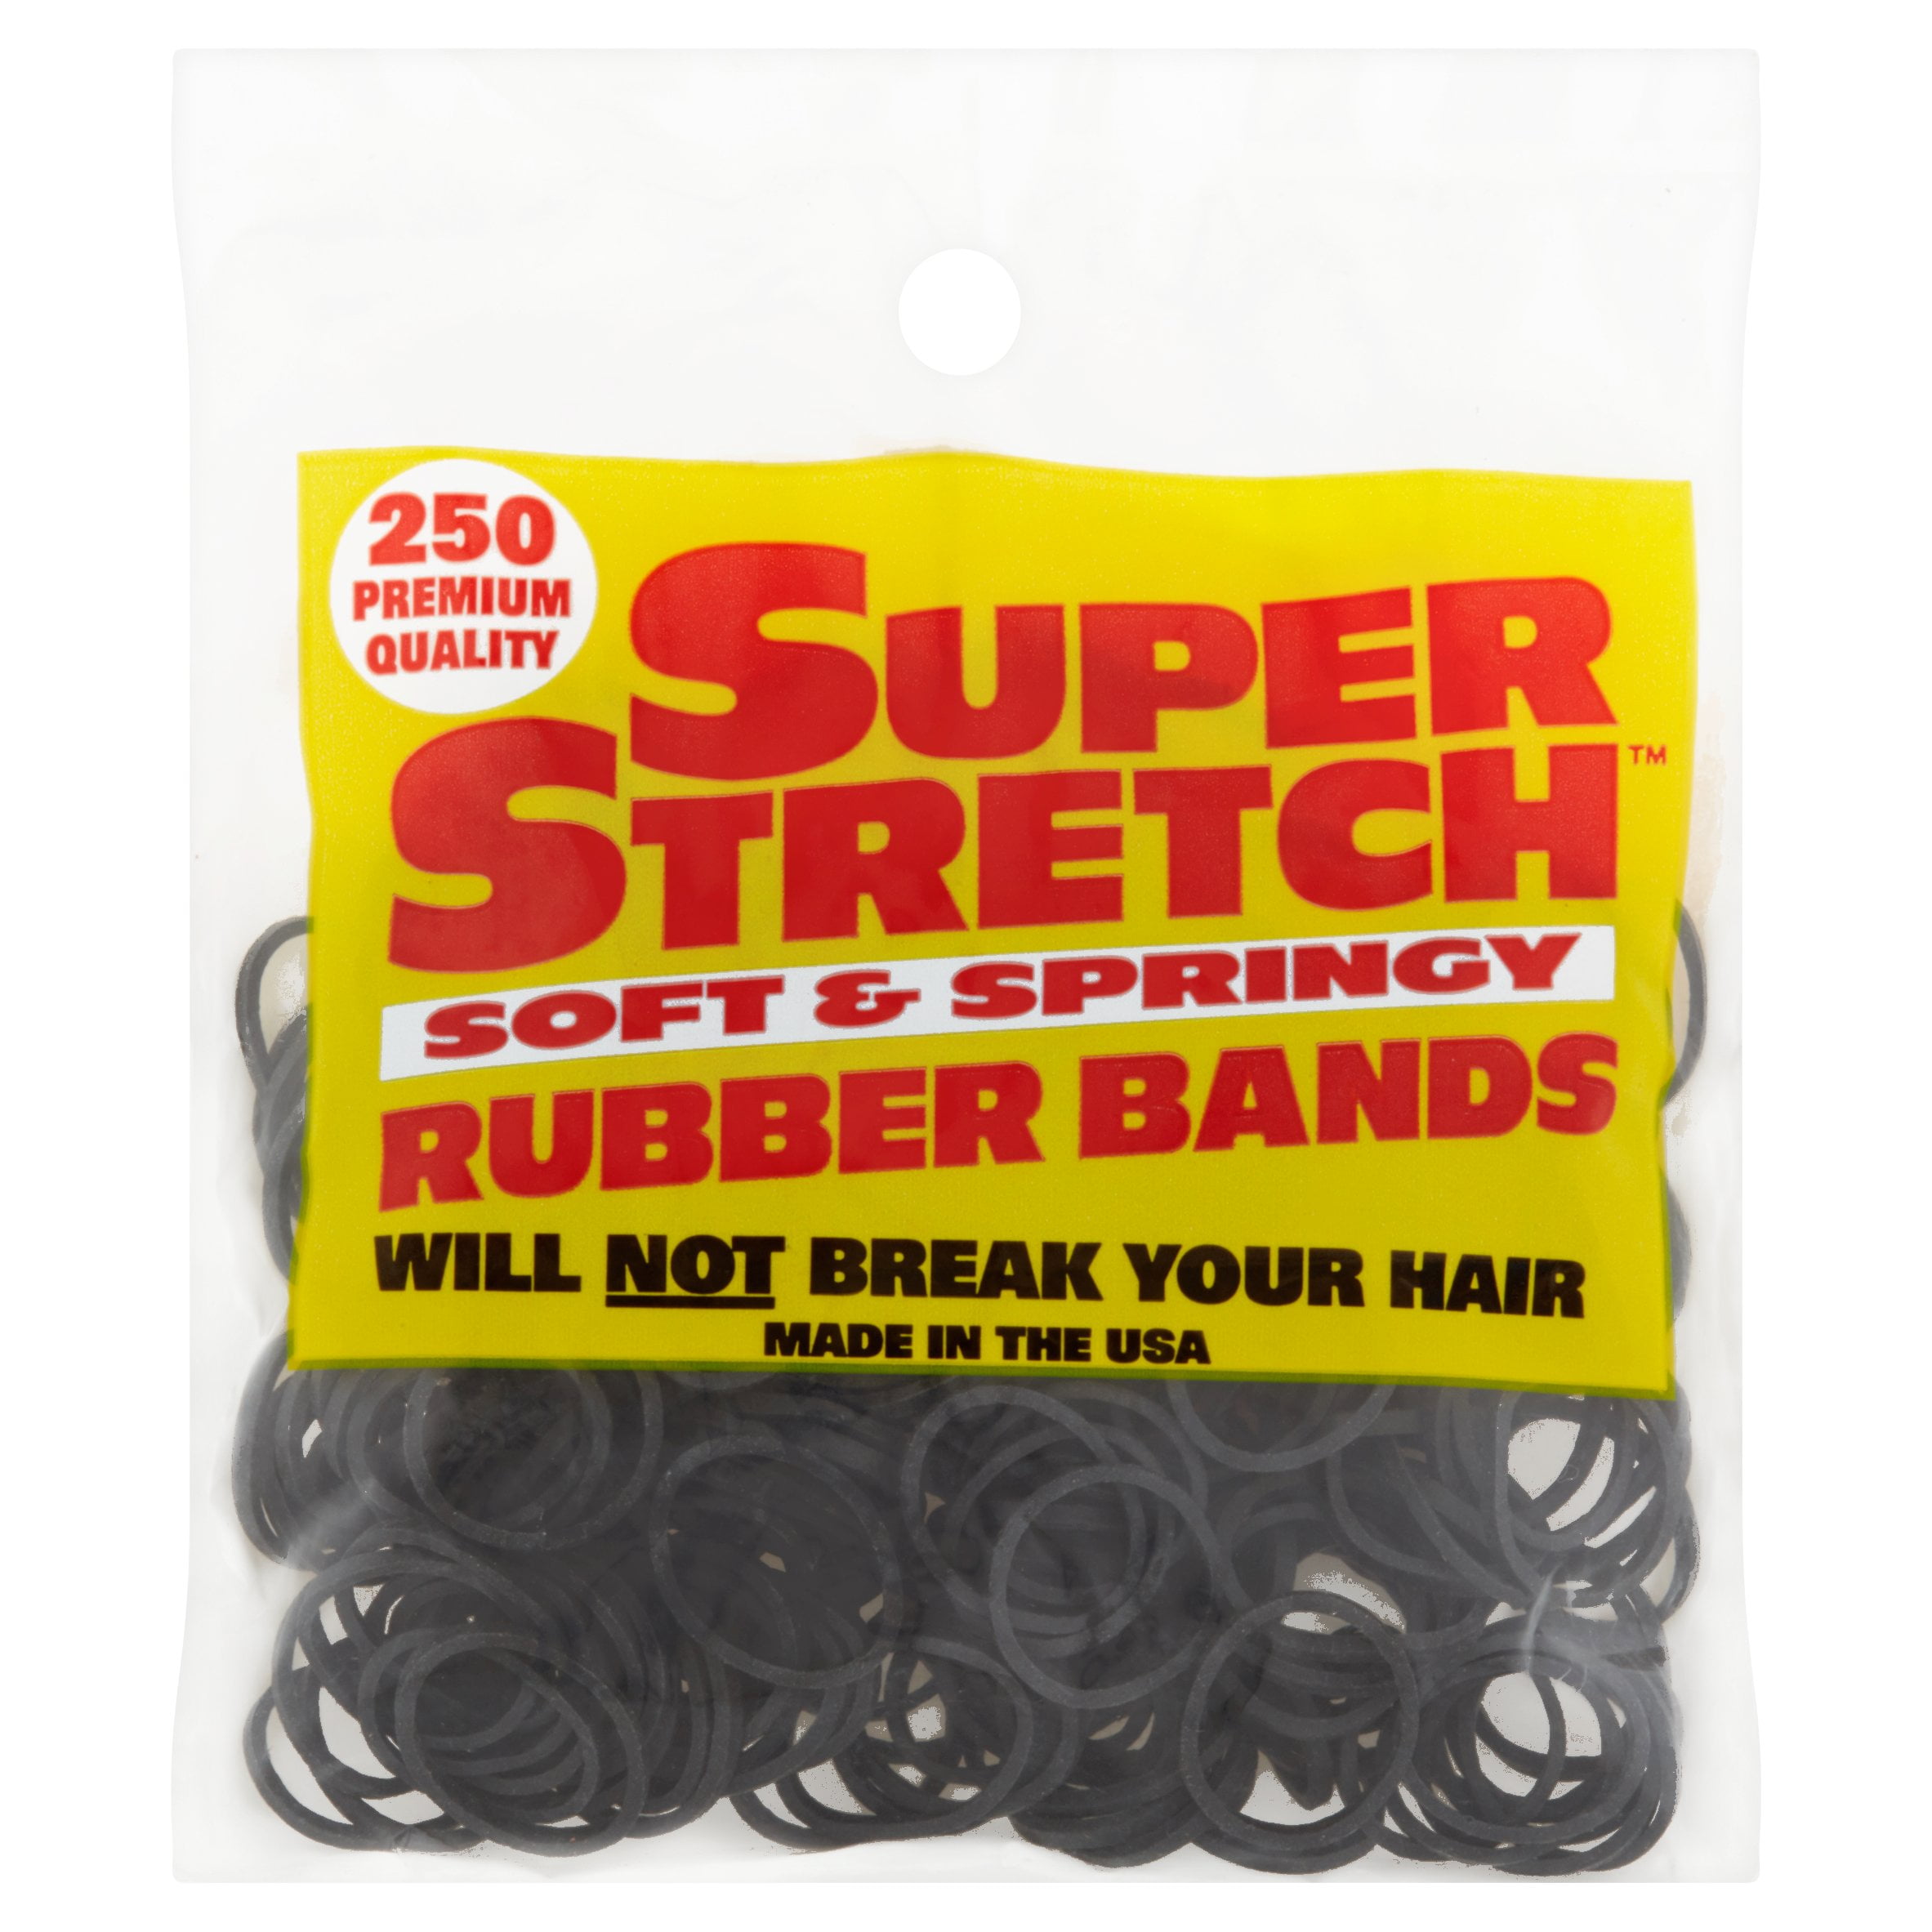 Spartan Super Stretch Rubber Bands for Ponytails Braids and Other Styles, Black, 250ct